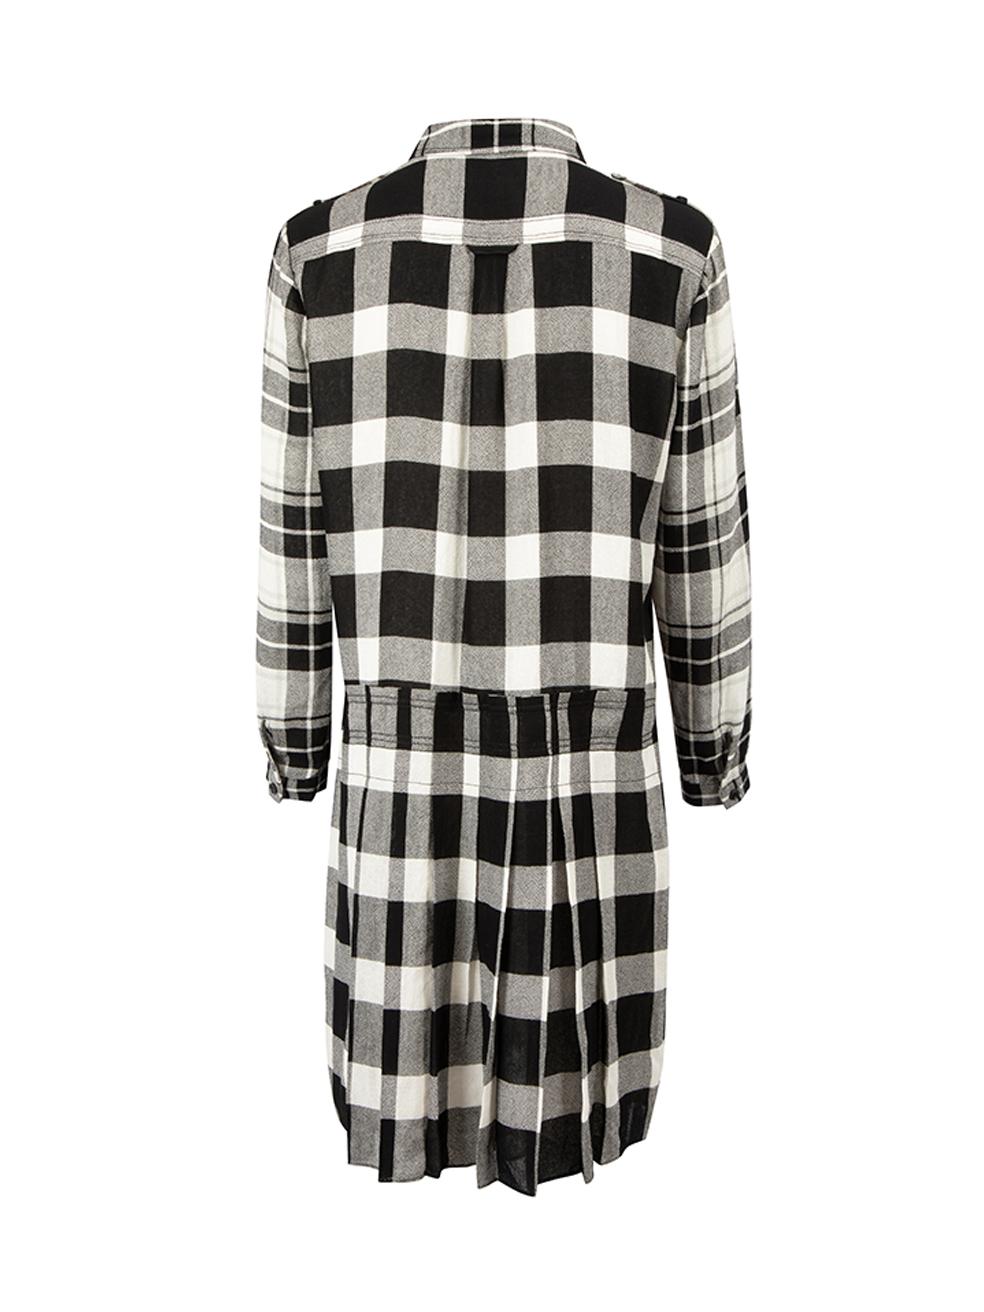 Burberry Black & White Check Print Knee-Length Dress Size L In Excellent Condition For Sale In London, GB